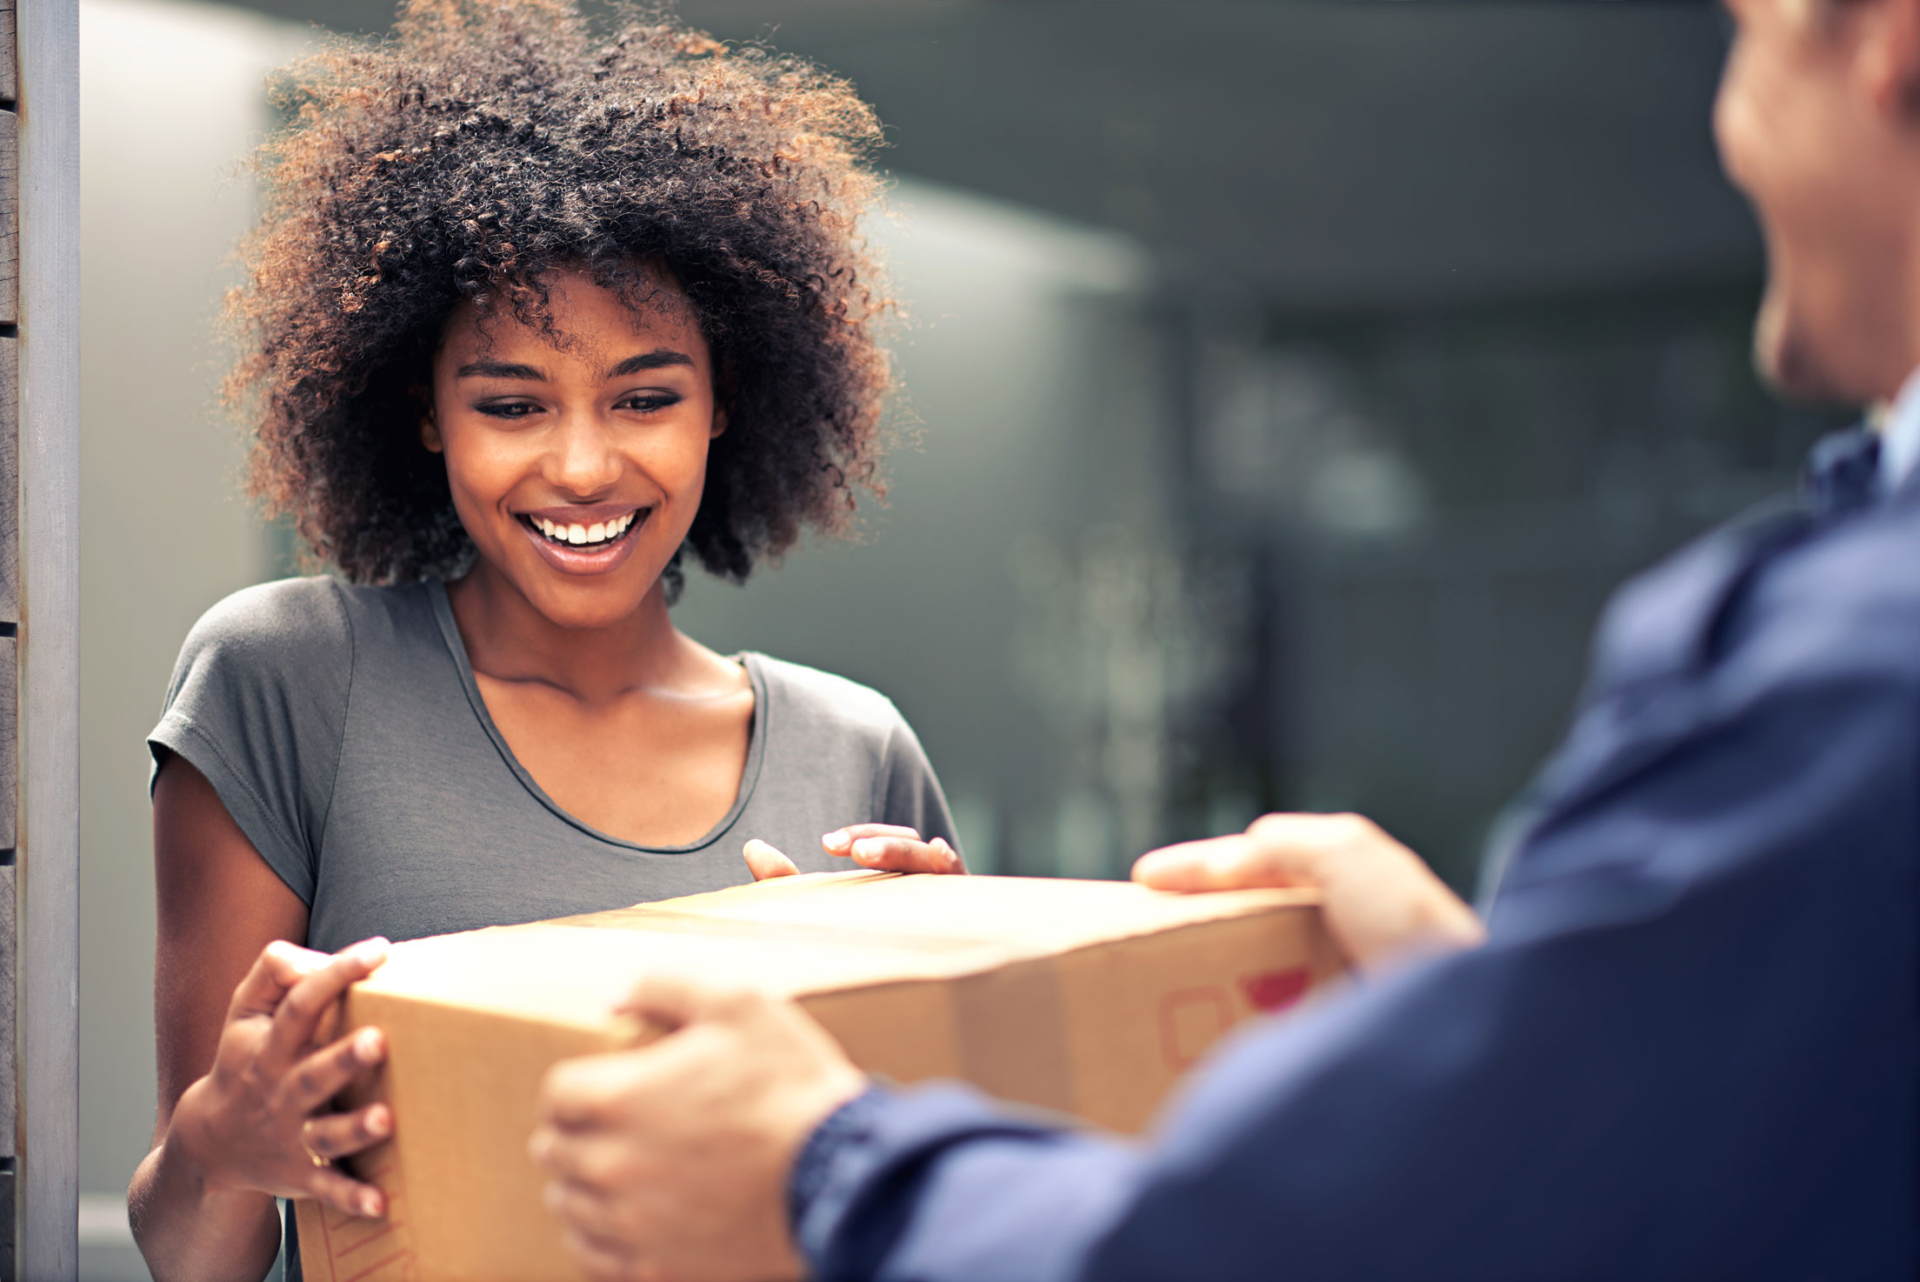 Woman receiving delivery box and smiling